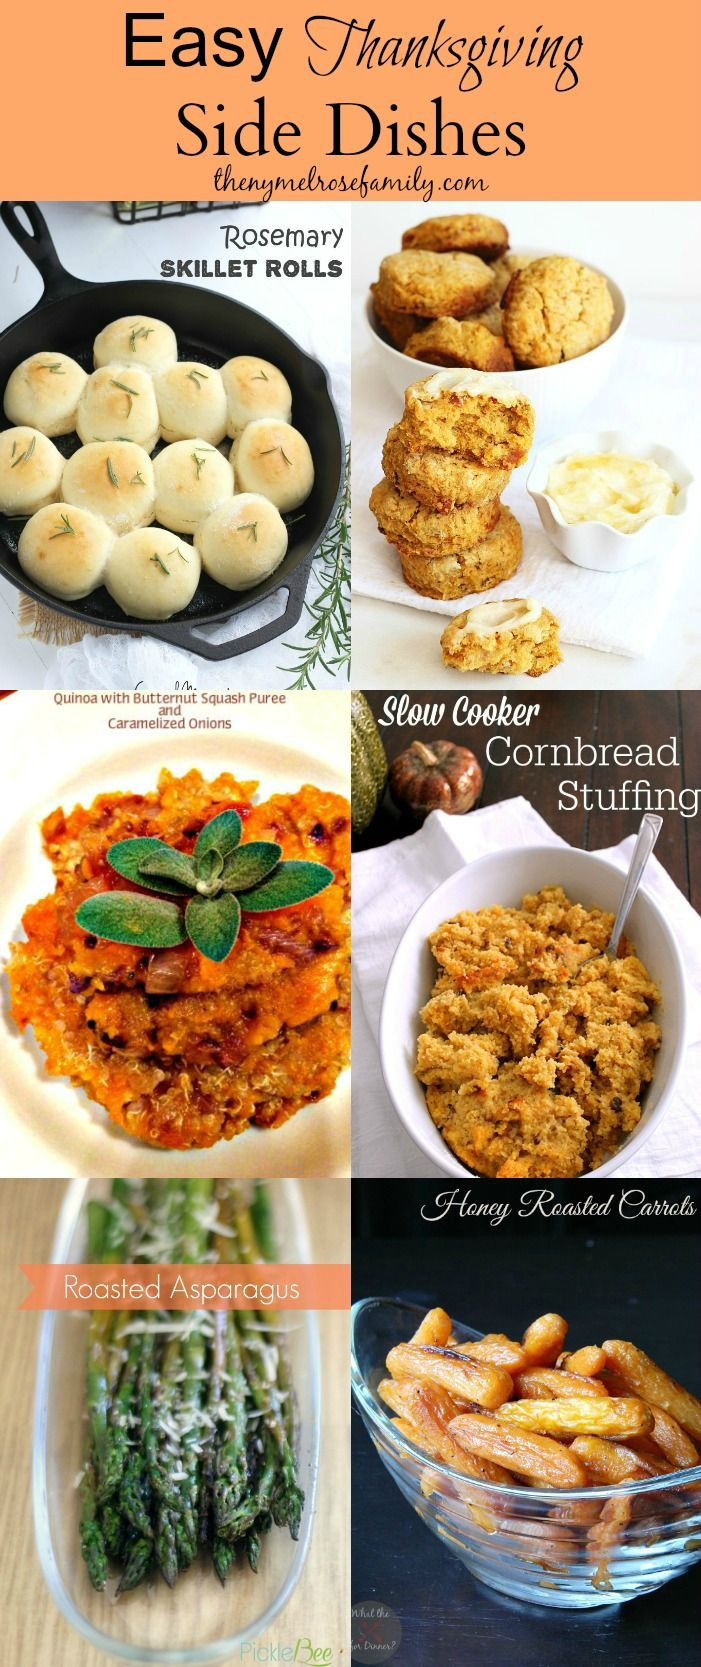 Easy Side Dishes For Thanksgiving
 199 best images about Easy Thanksgiving Recipes & Crafts